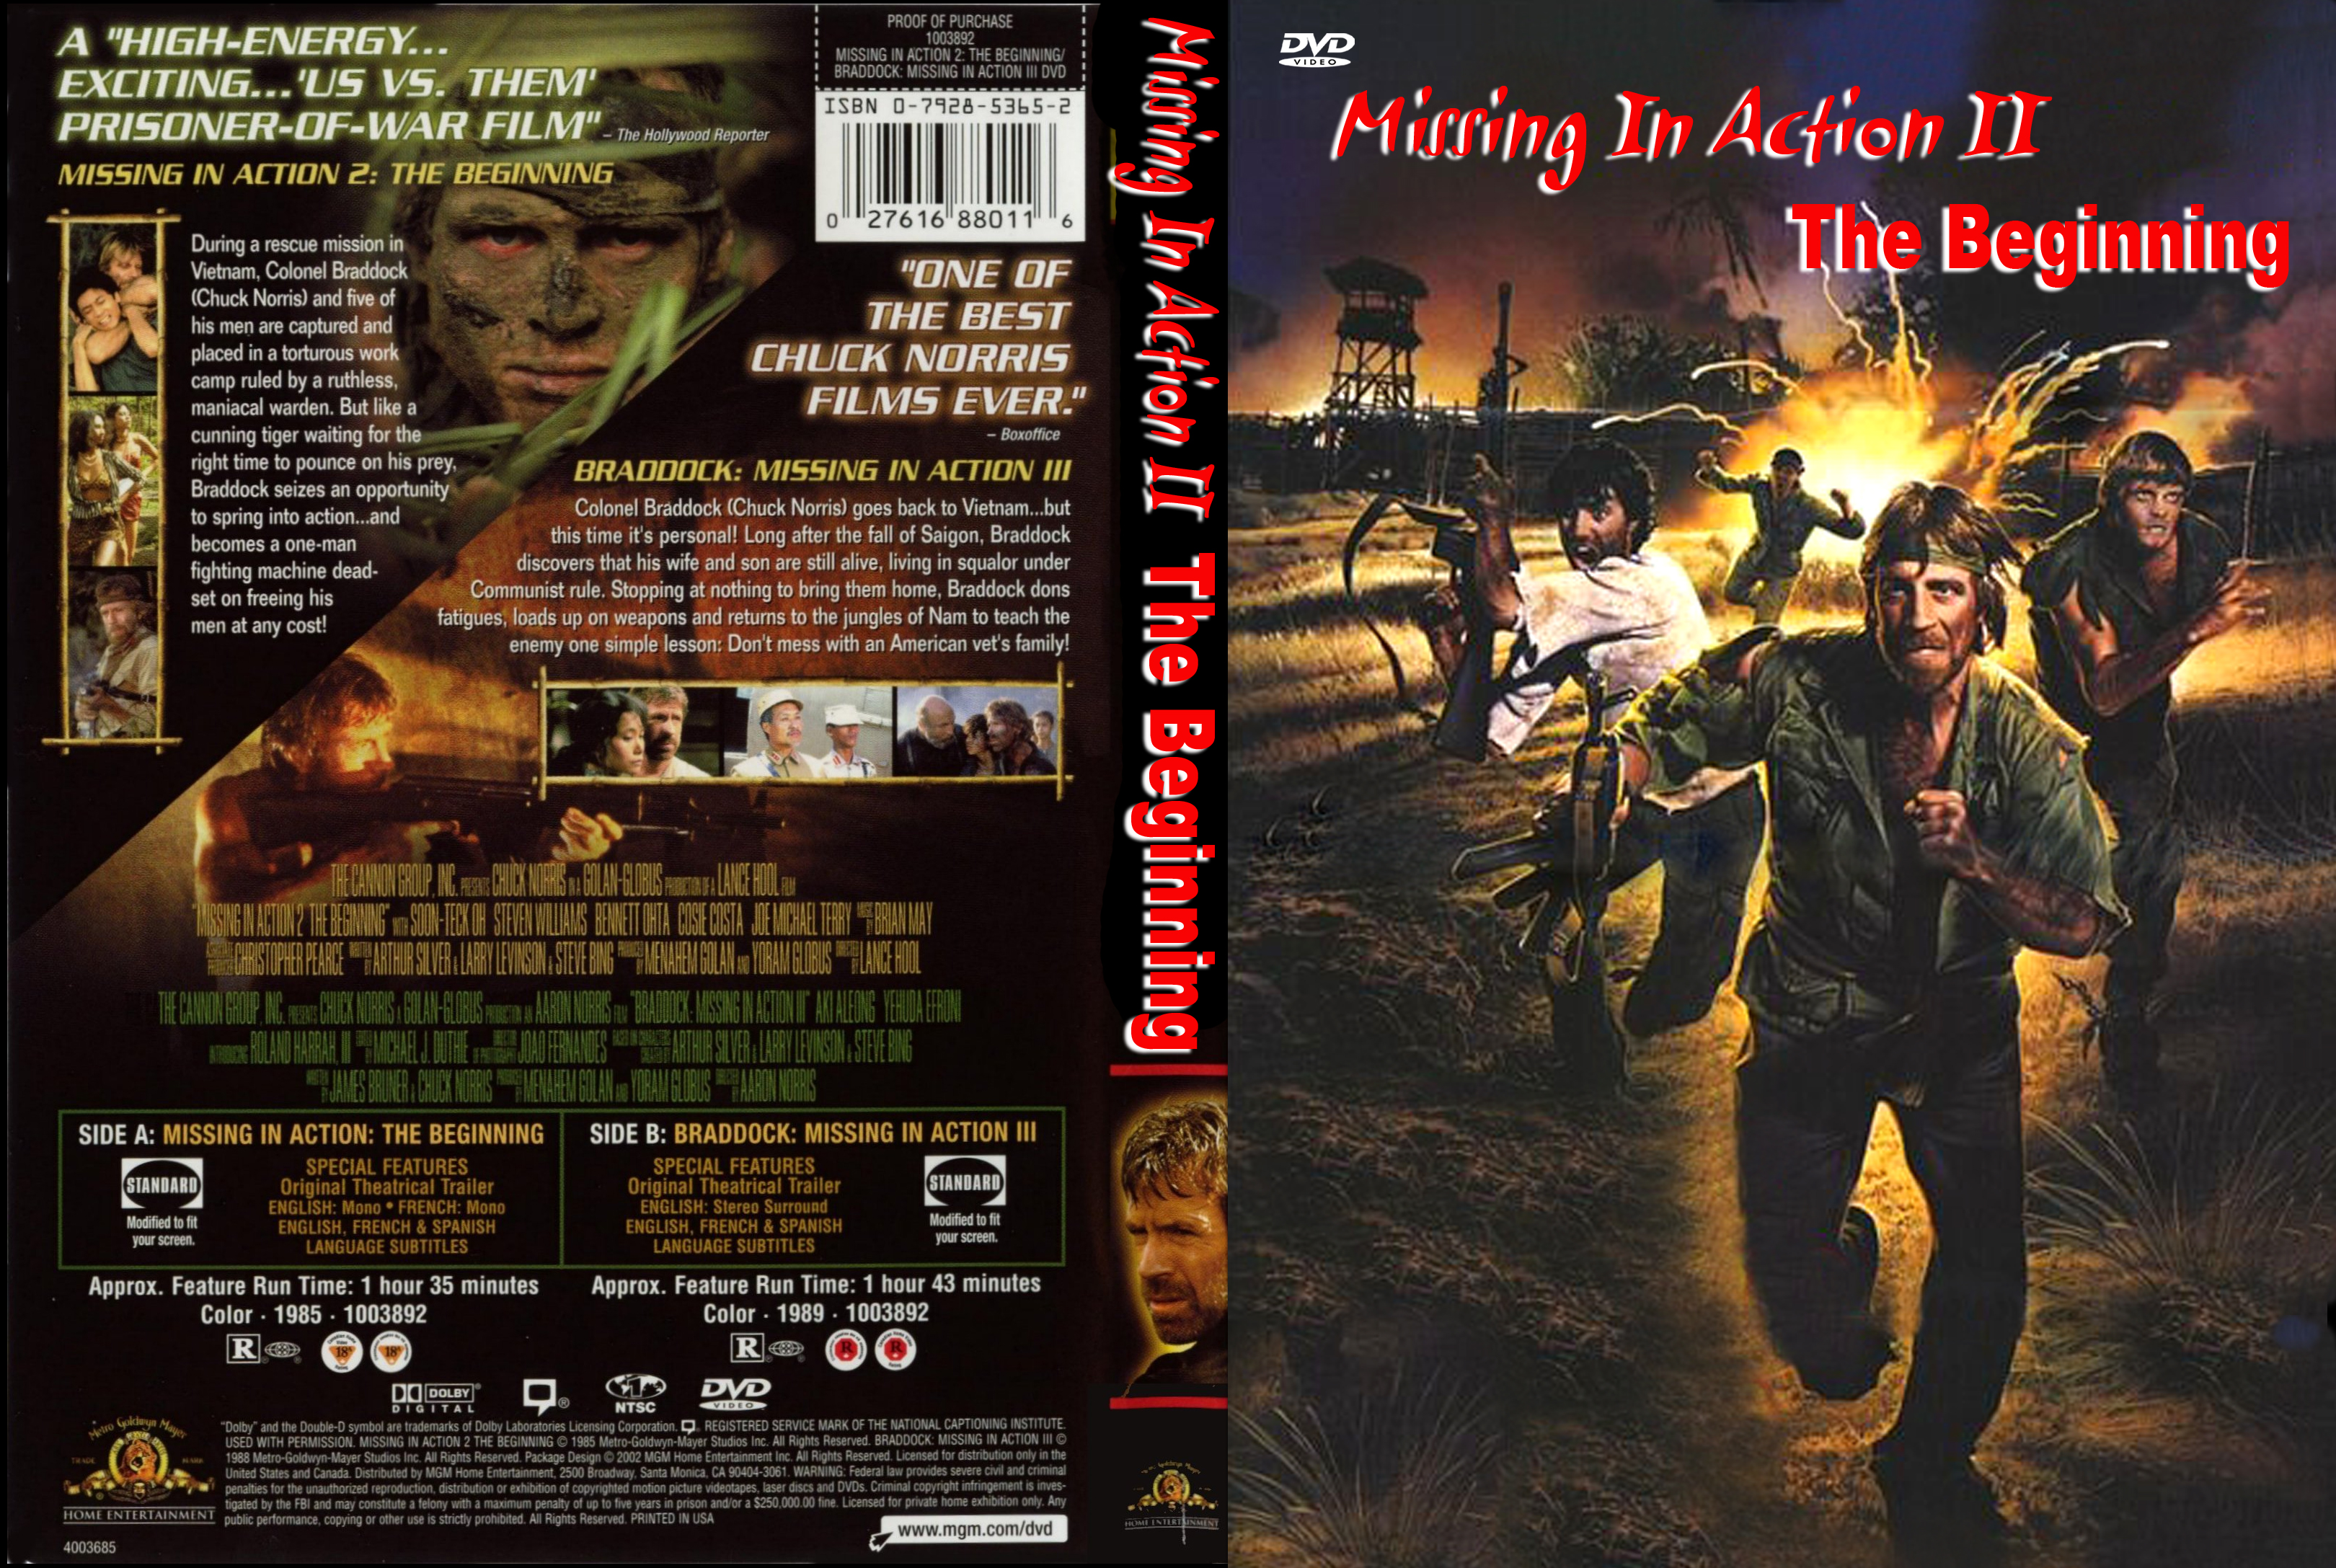 Chuck Norris Collectie DvD 6 Missing in Action 2 (1985)